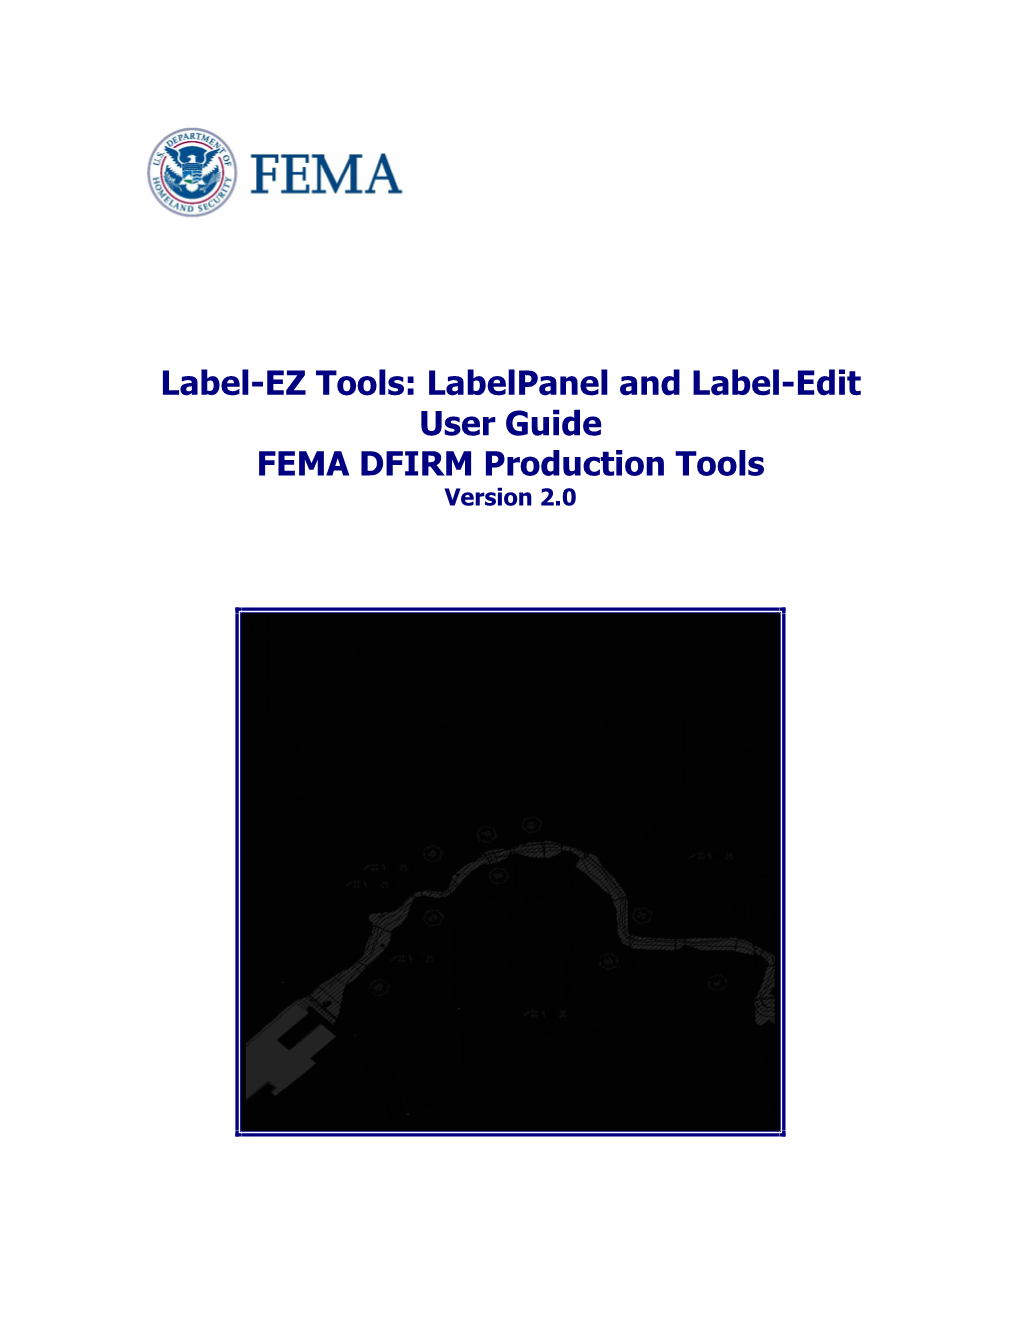 Labelpanel and Label-Edit User Guide FEMA DFIRM Production Tools Version 2.0